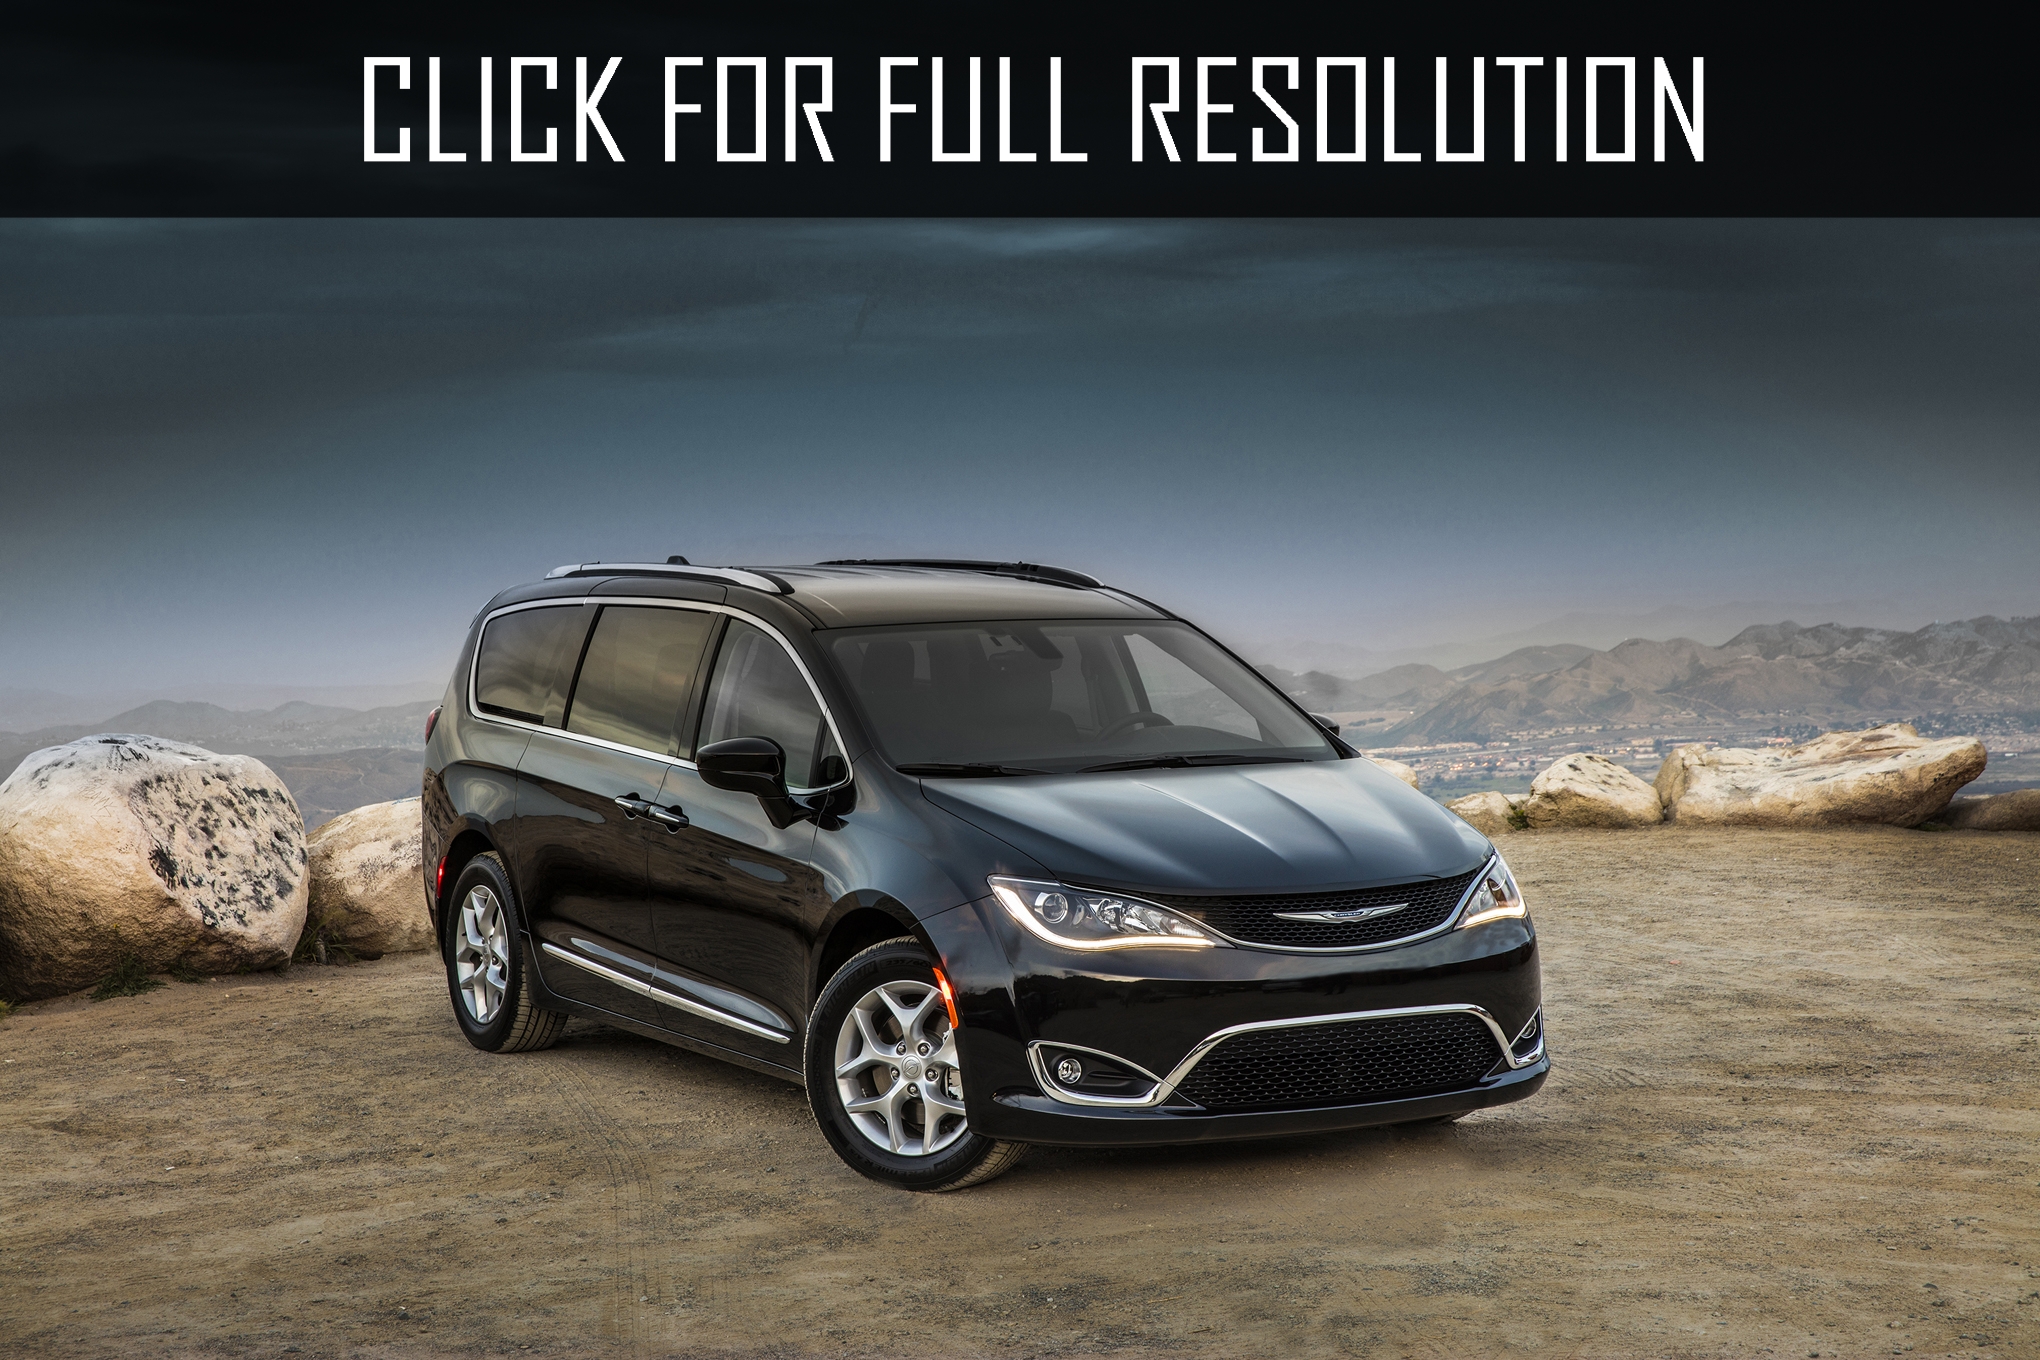 2016 Chrysler Pacifica news, reviews, msrp, ratings with